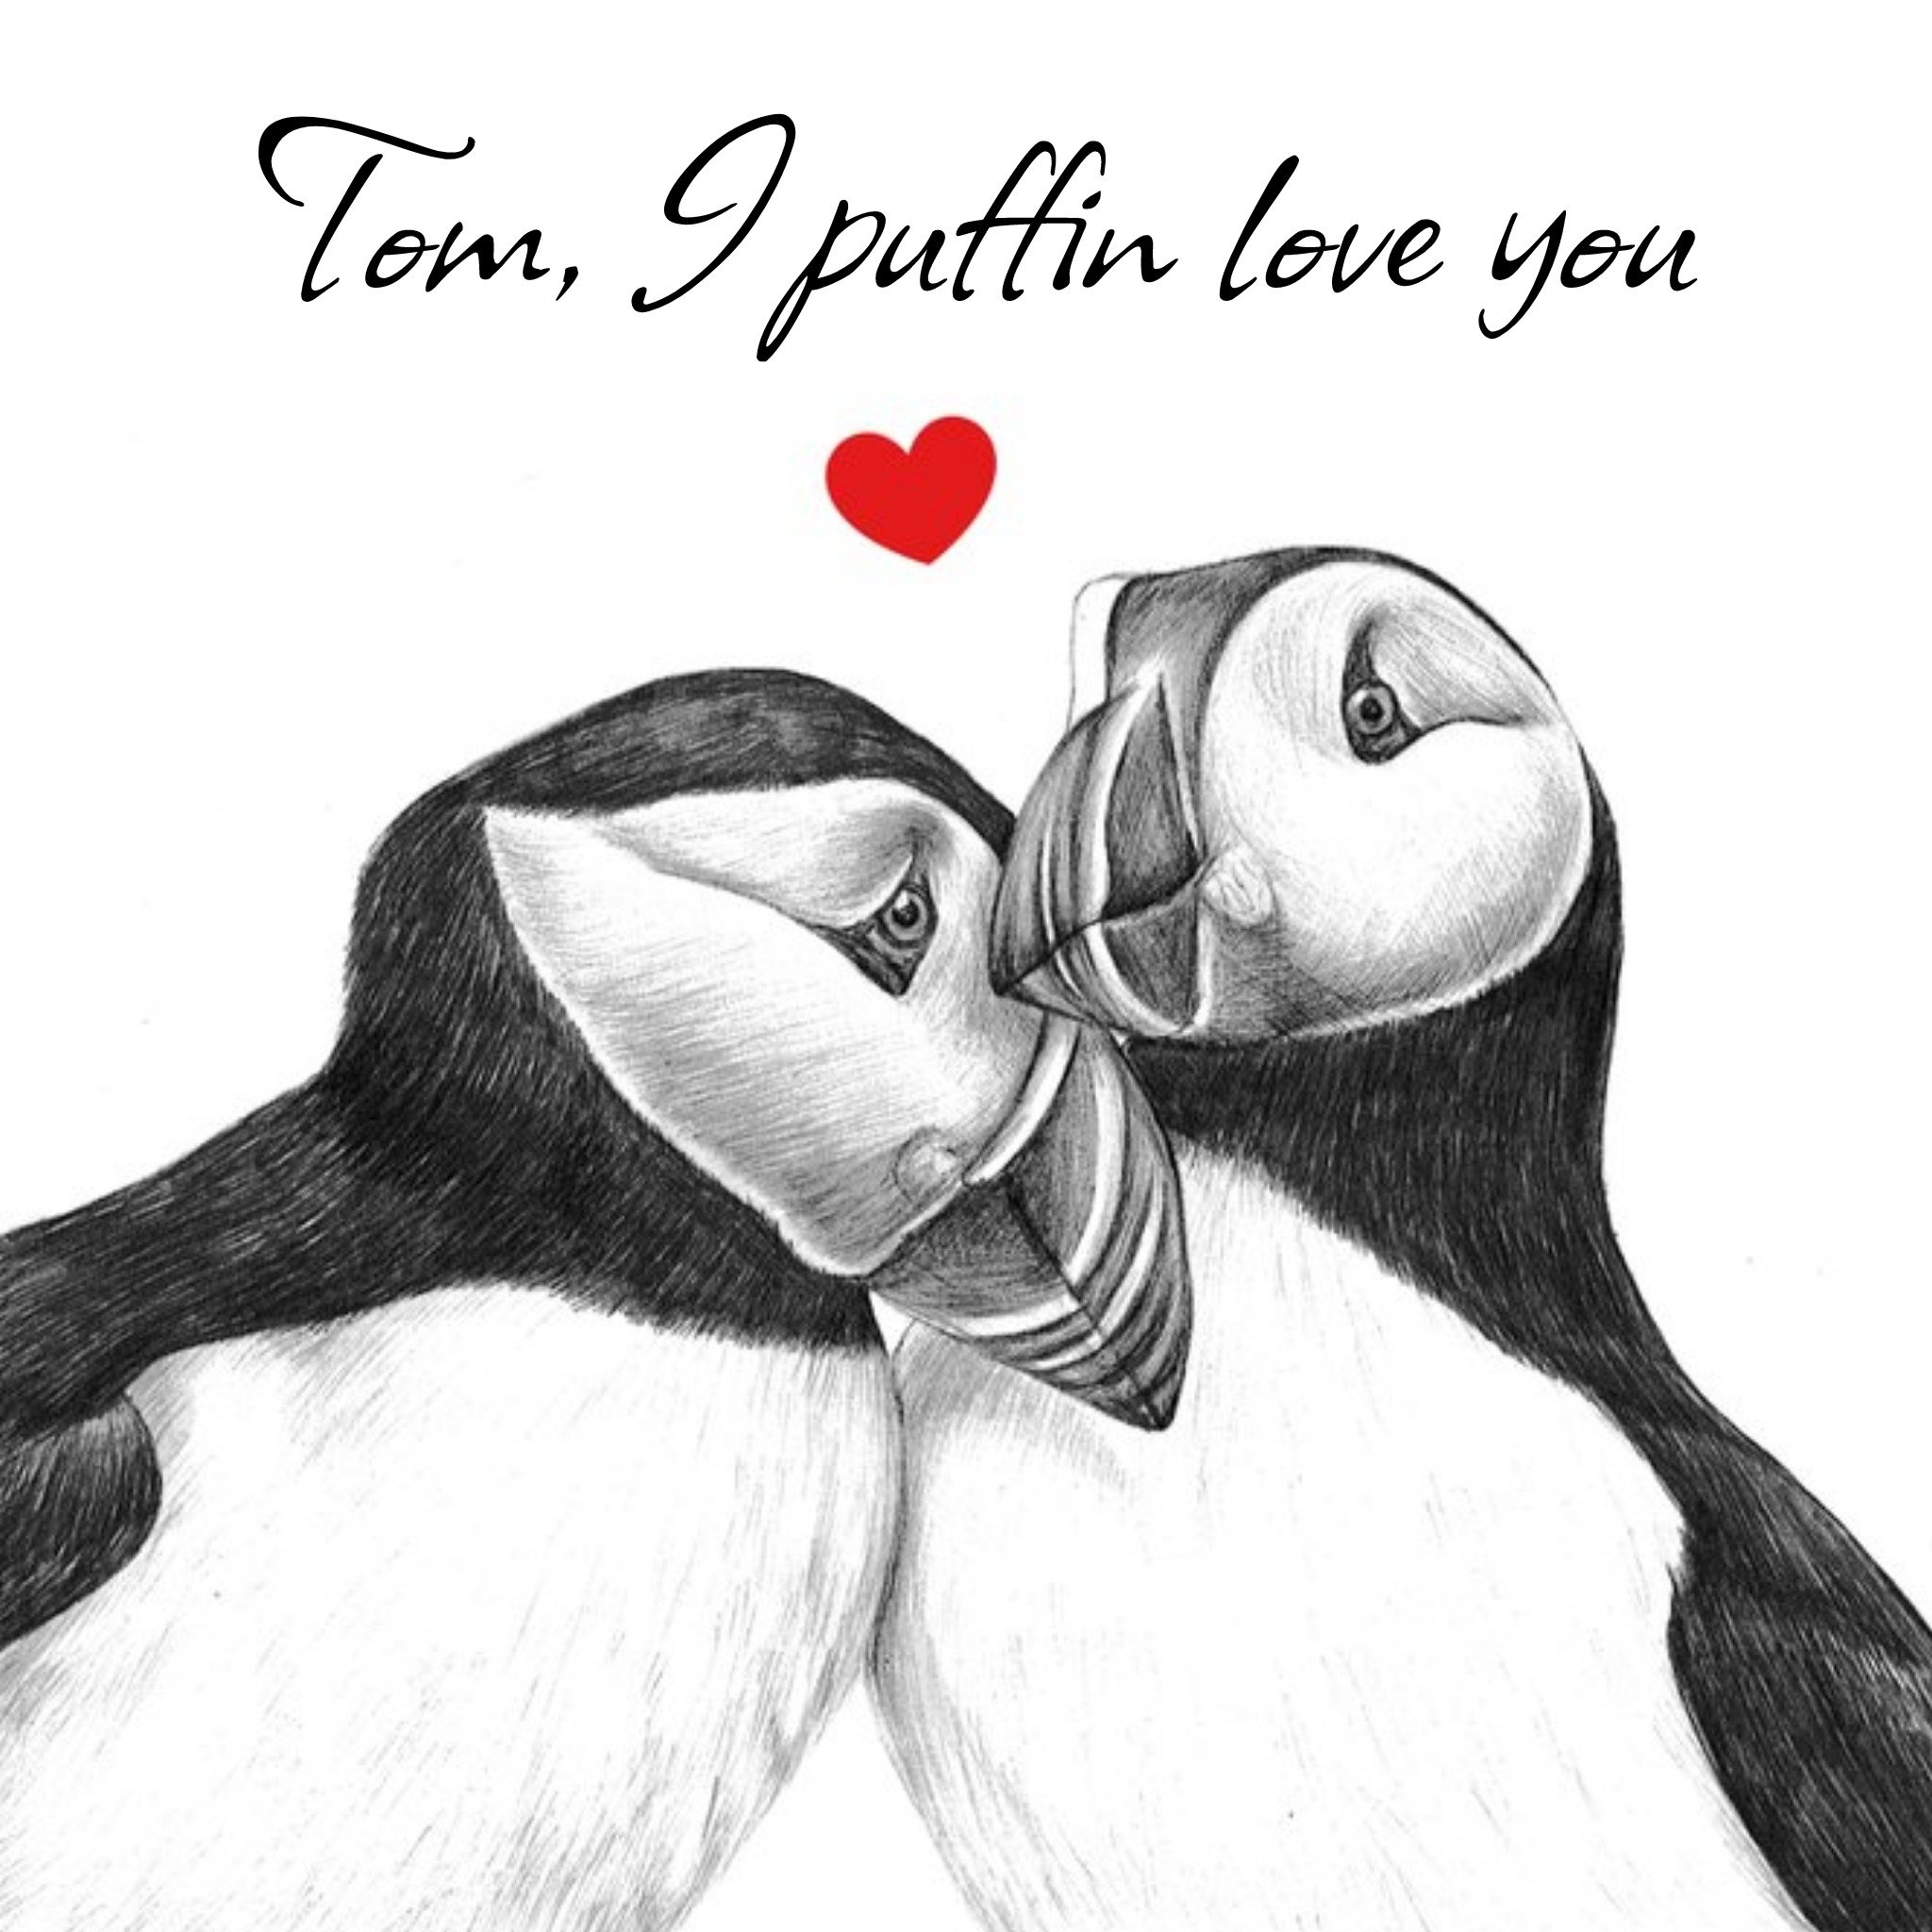 Moonpig Cute Illustrated I Puffin Love You Valentine's Day Card, Square